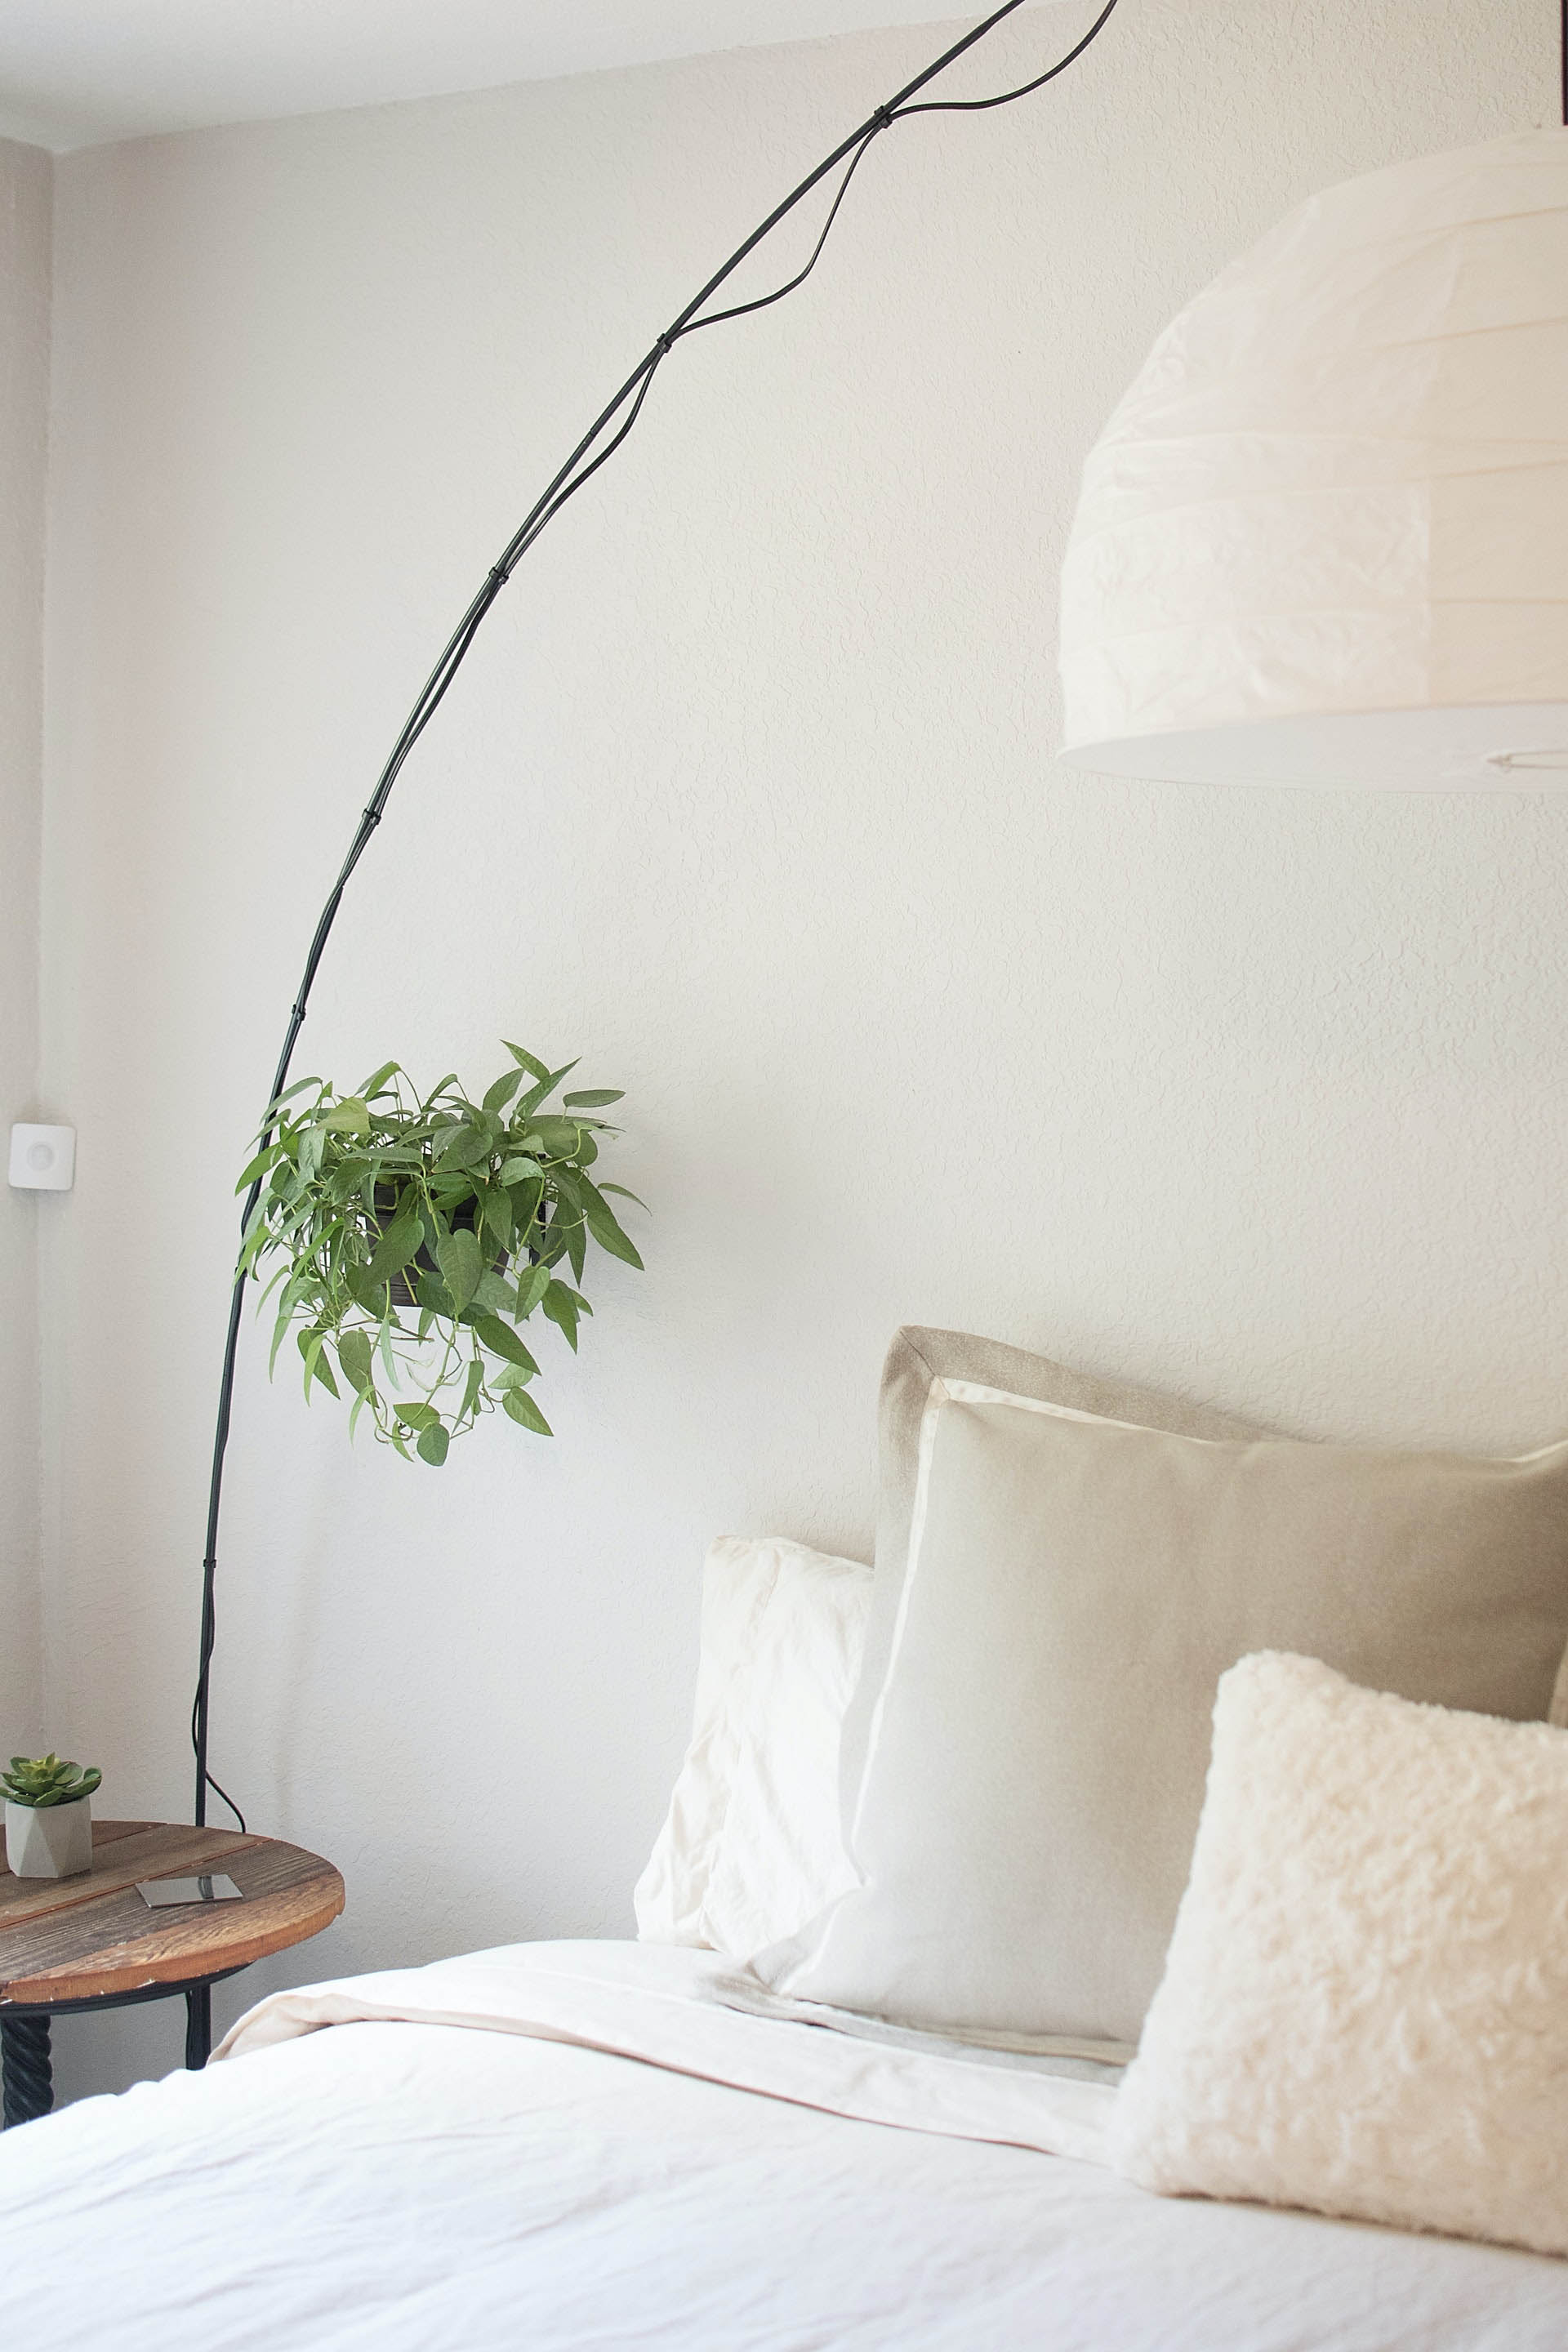 A bed with white blankets, an lamp above, and a plant next to it